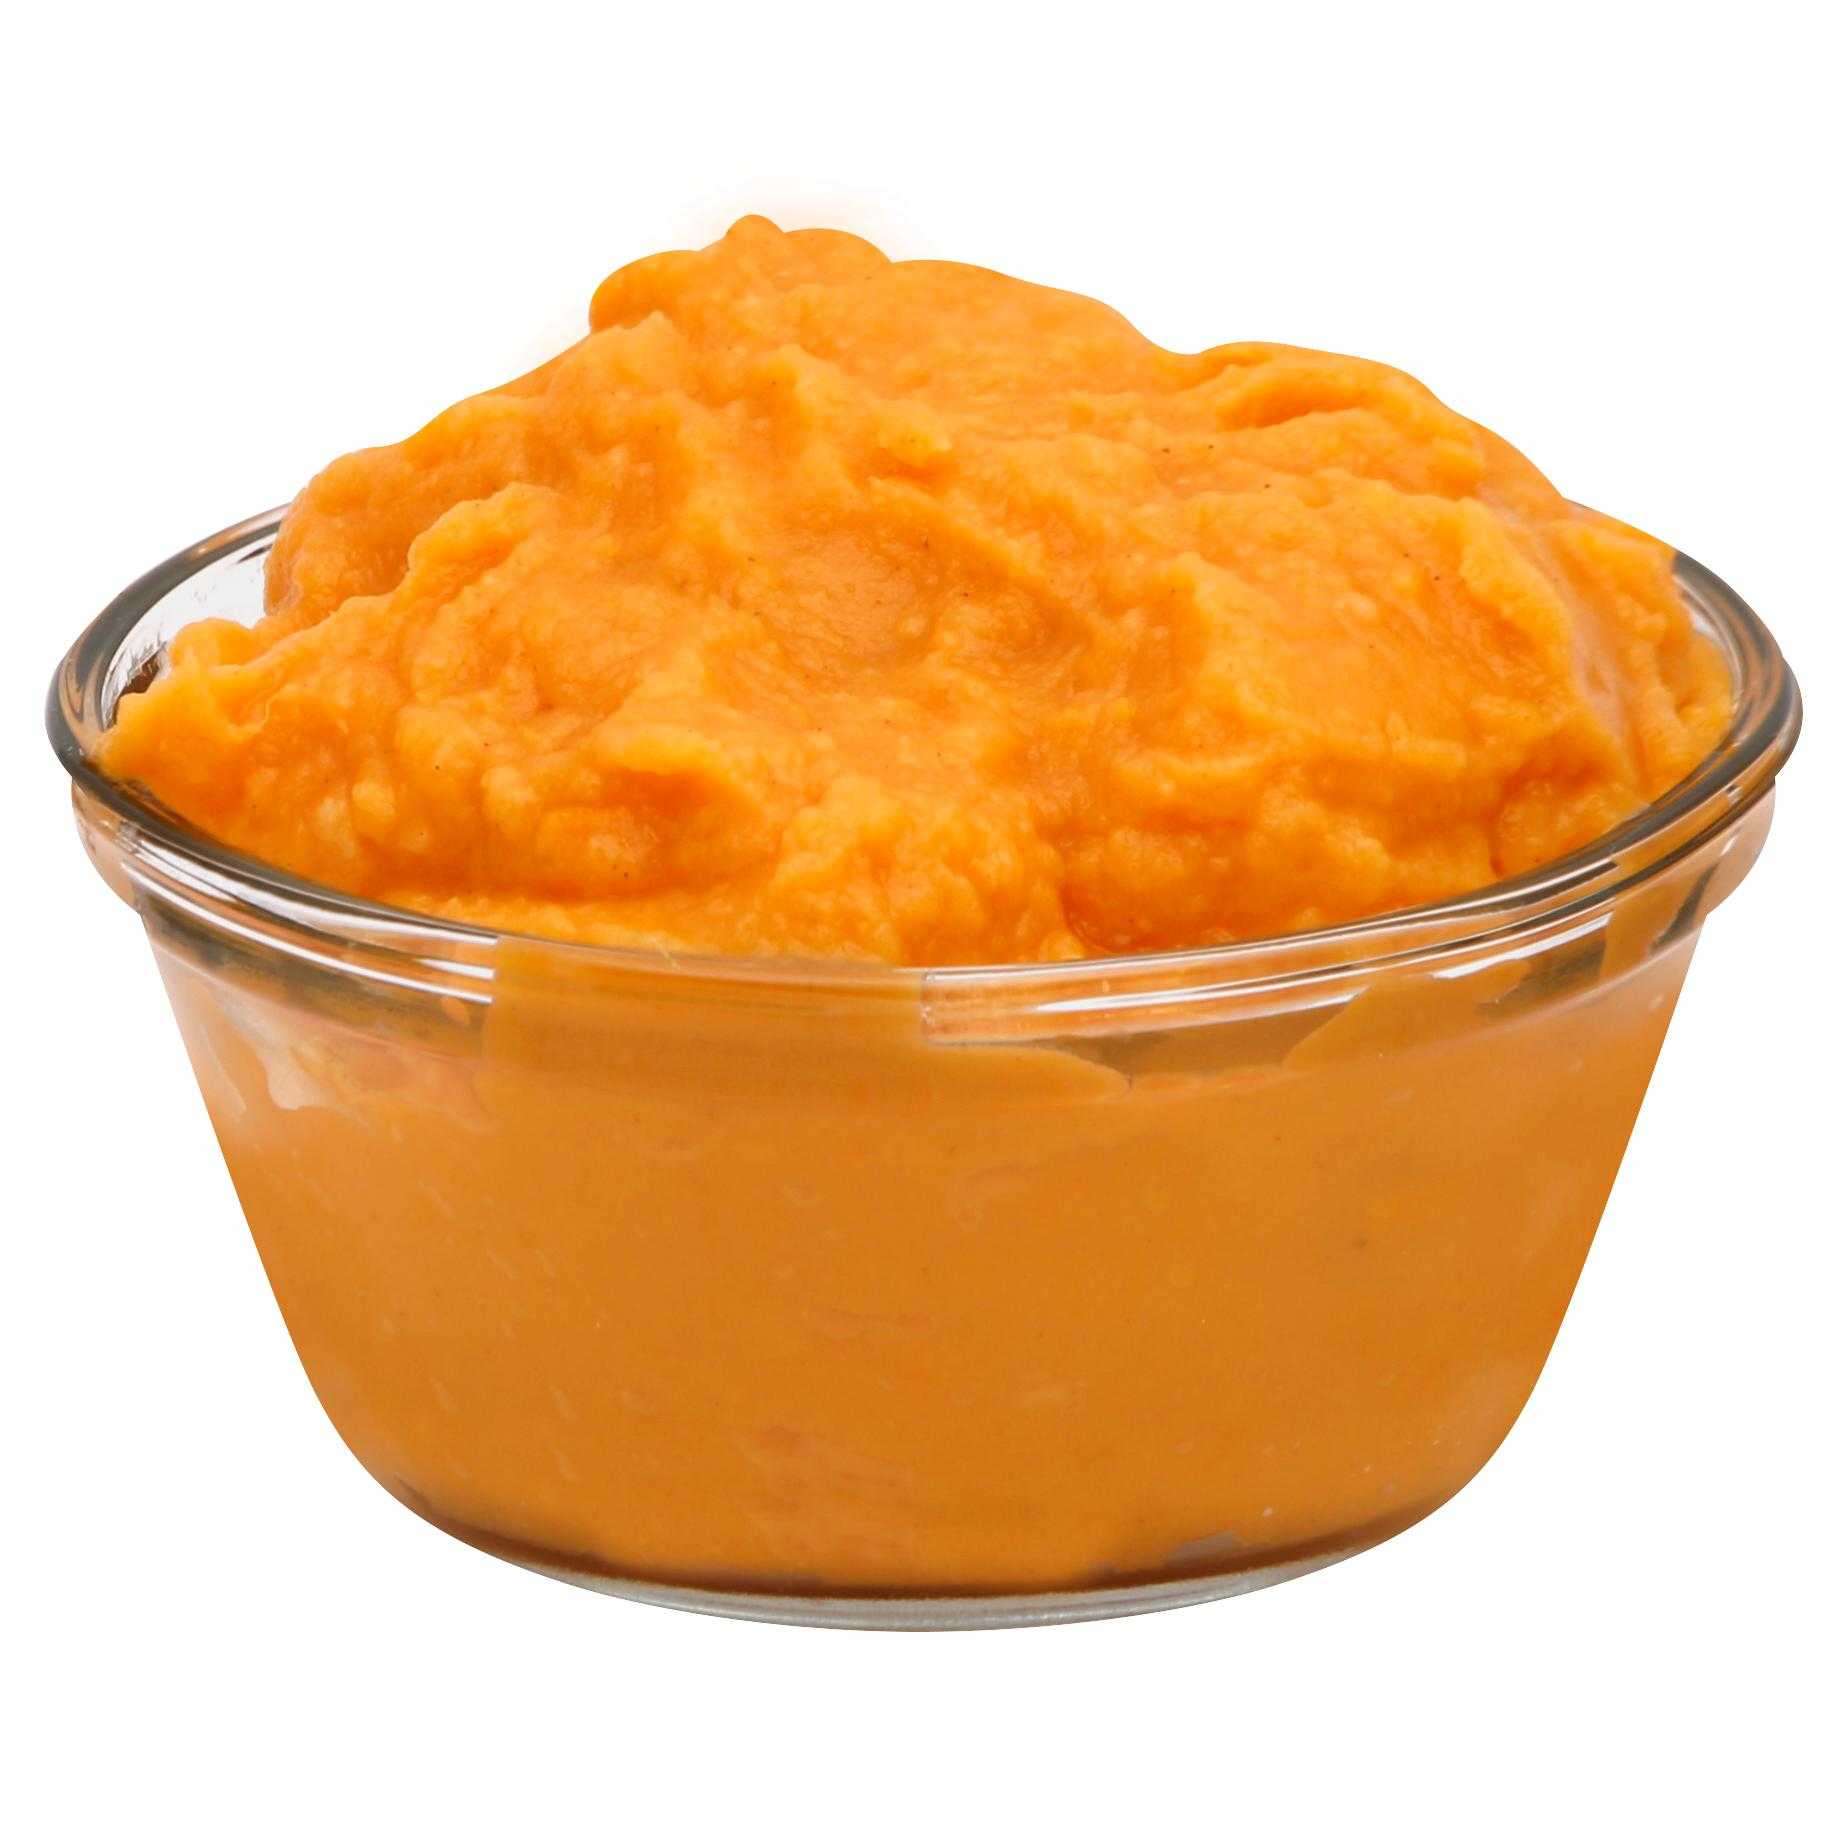 Simply Potatoes® Refrigerated Mashed Sweet Potatoes made with peeled sweet potatoes, 4/6 Lb Bags